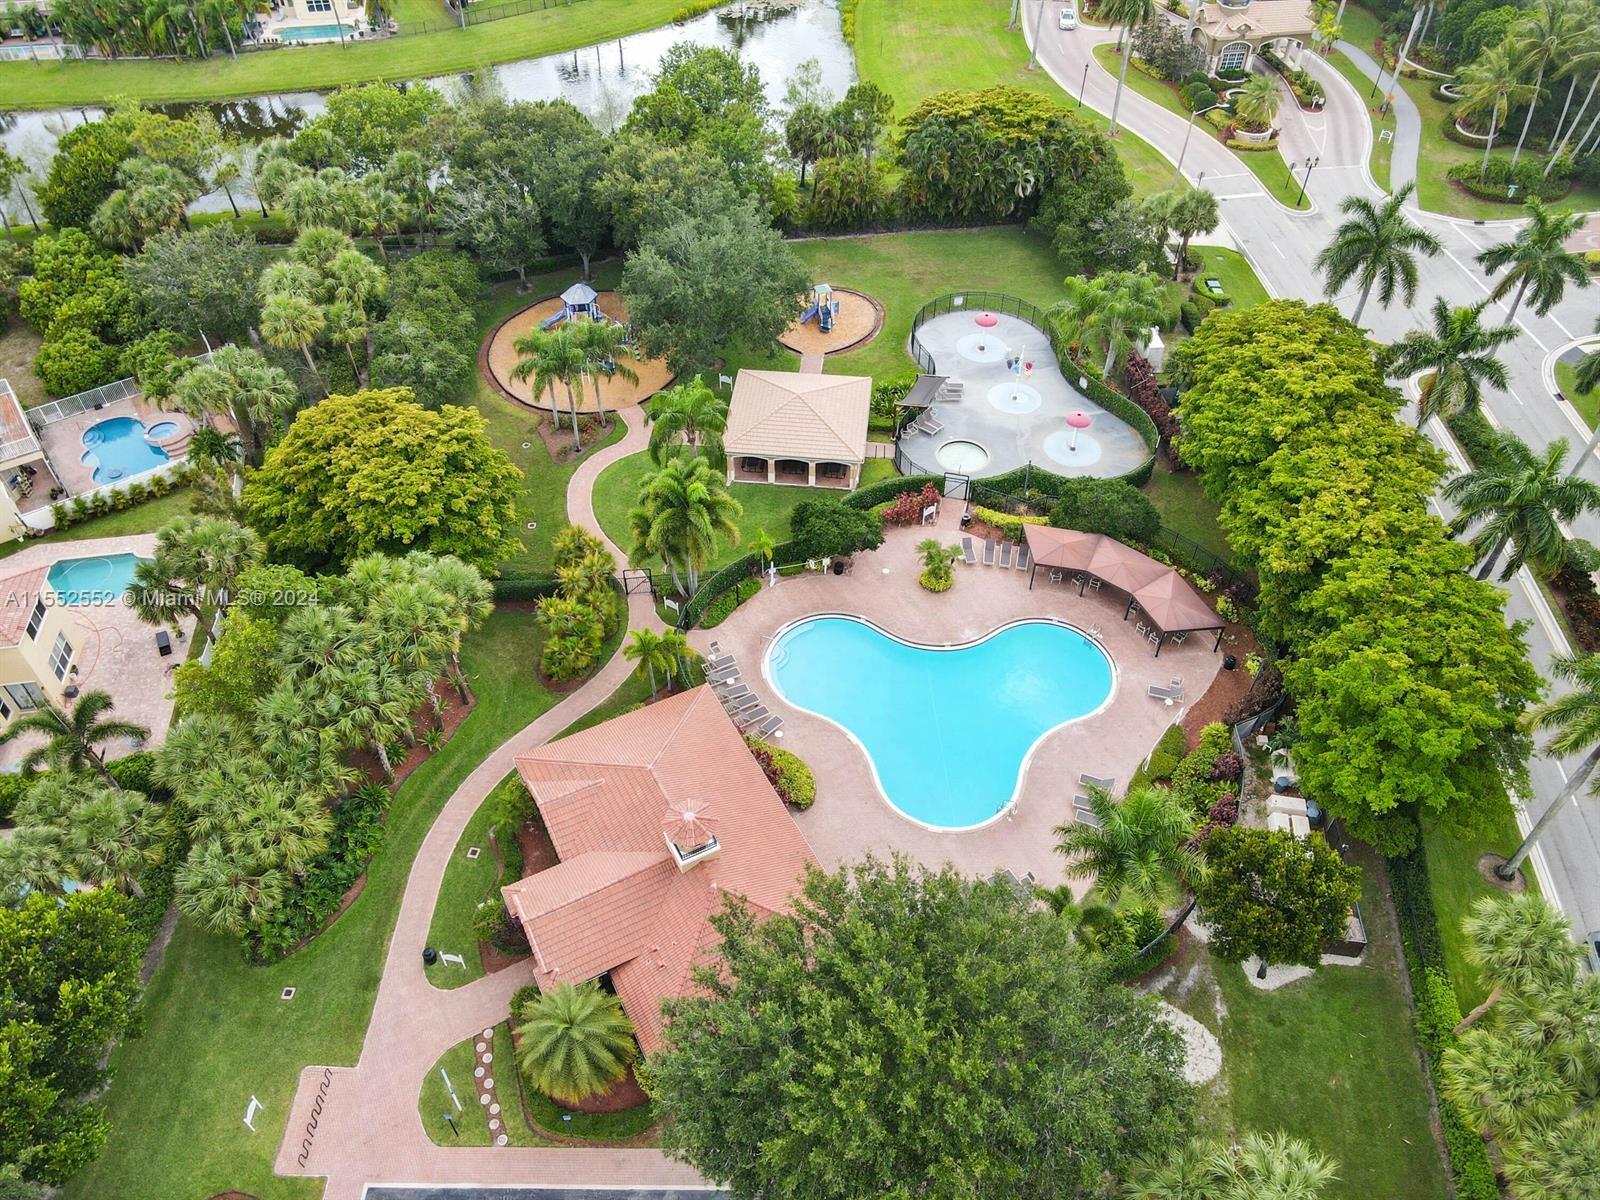 an aerial view of a house with a swimming pool a yard and outdoor seating